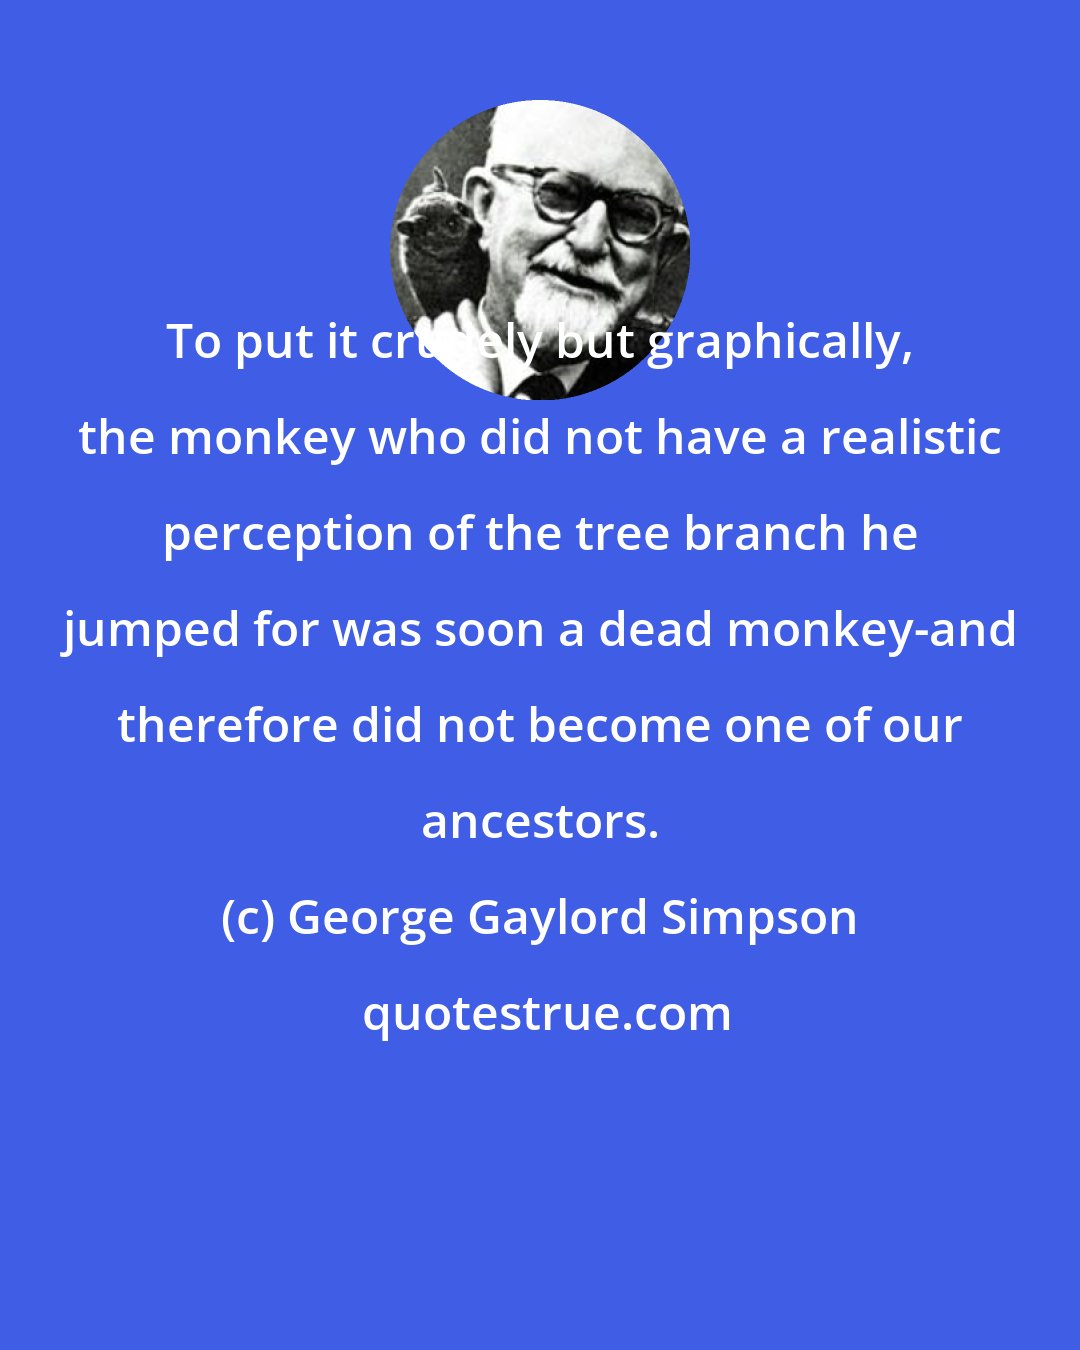 George Gaylord Simpson: To put it crudely but graphically, the monkey who did not have a realistic perception of the tree branch he jumped for was soon a dead monkey-and therefore did not become one of our ancestors.